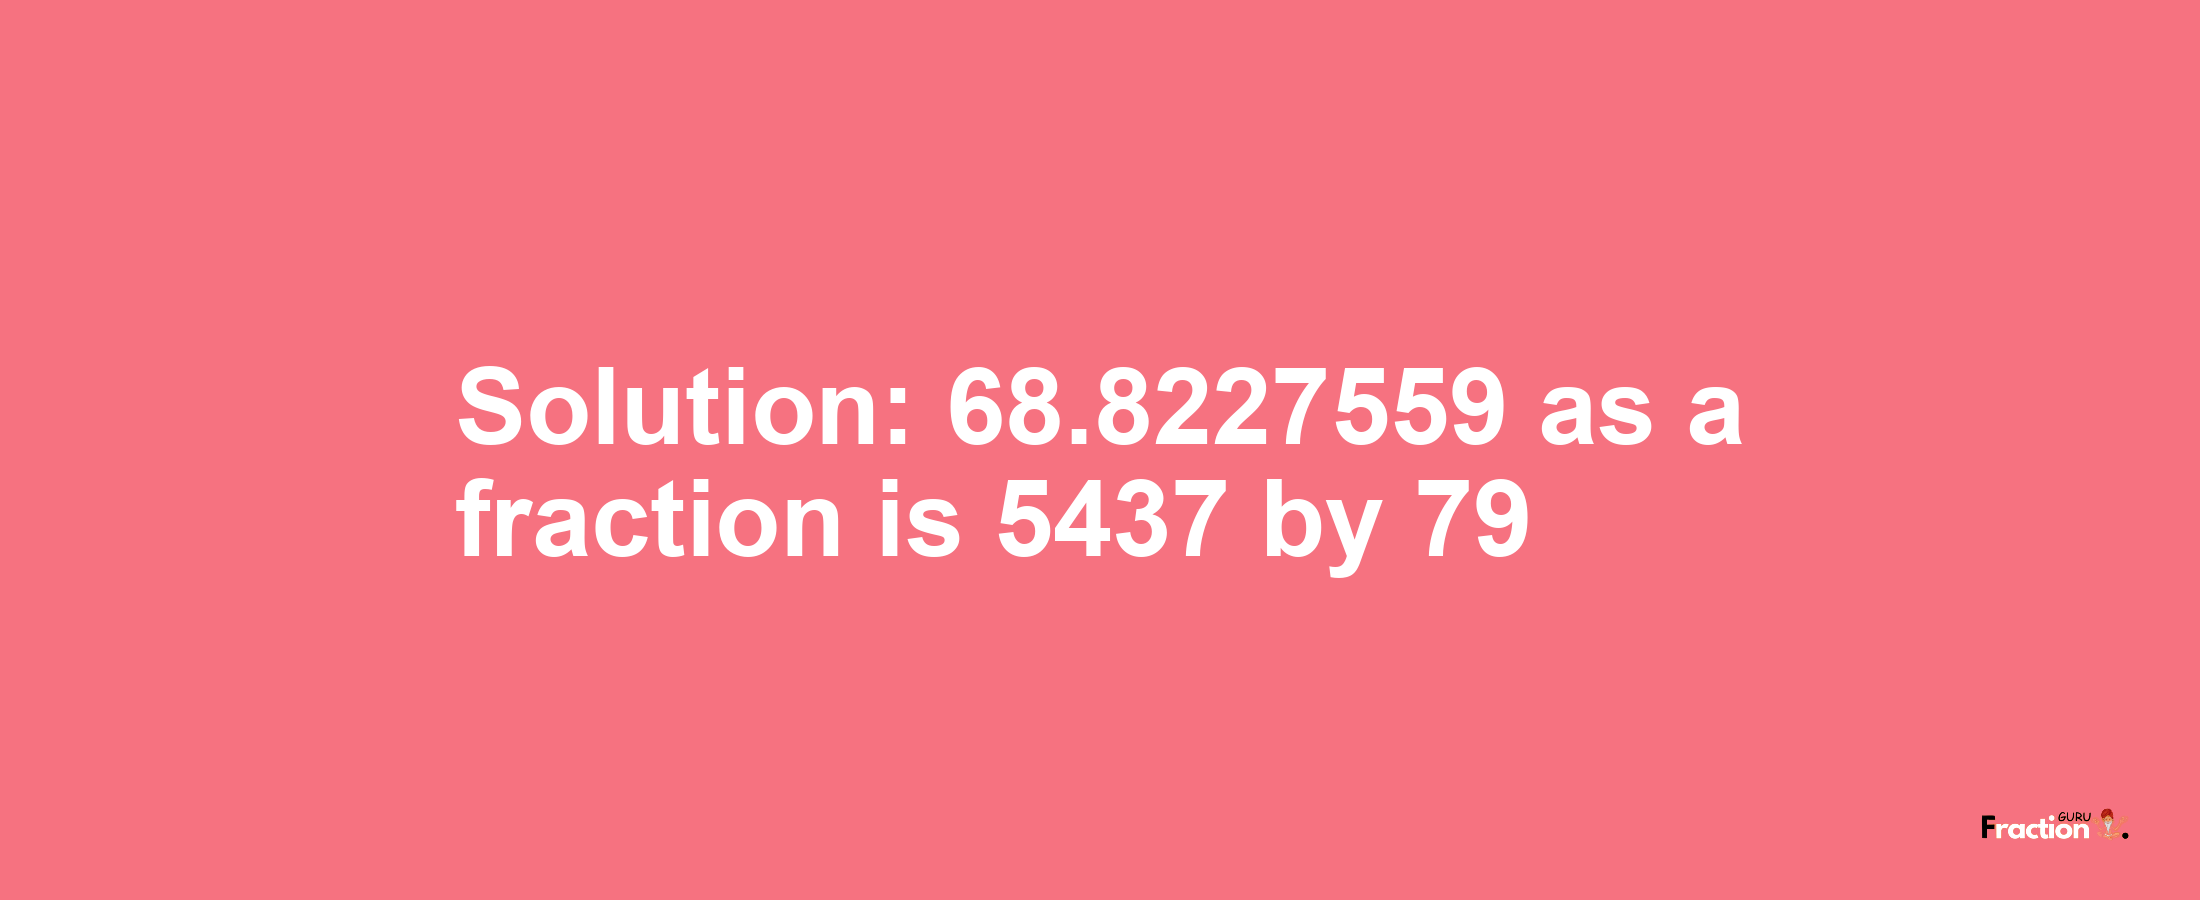 Solution:68.8227559 as a fraction is 5437/79